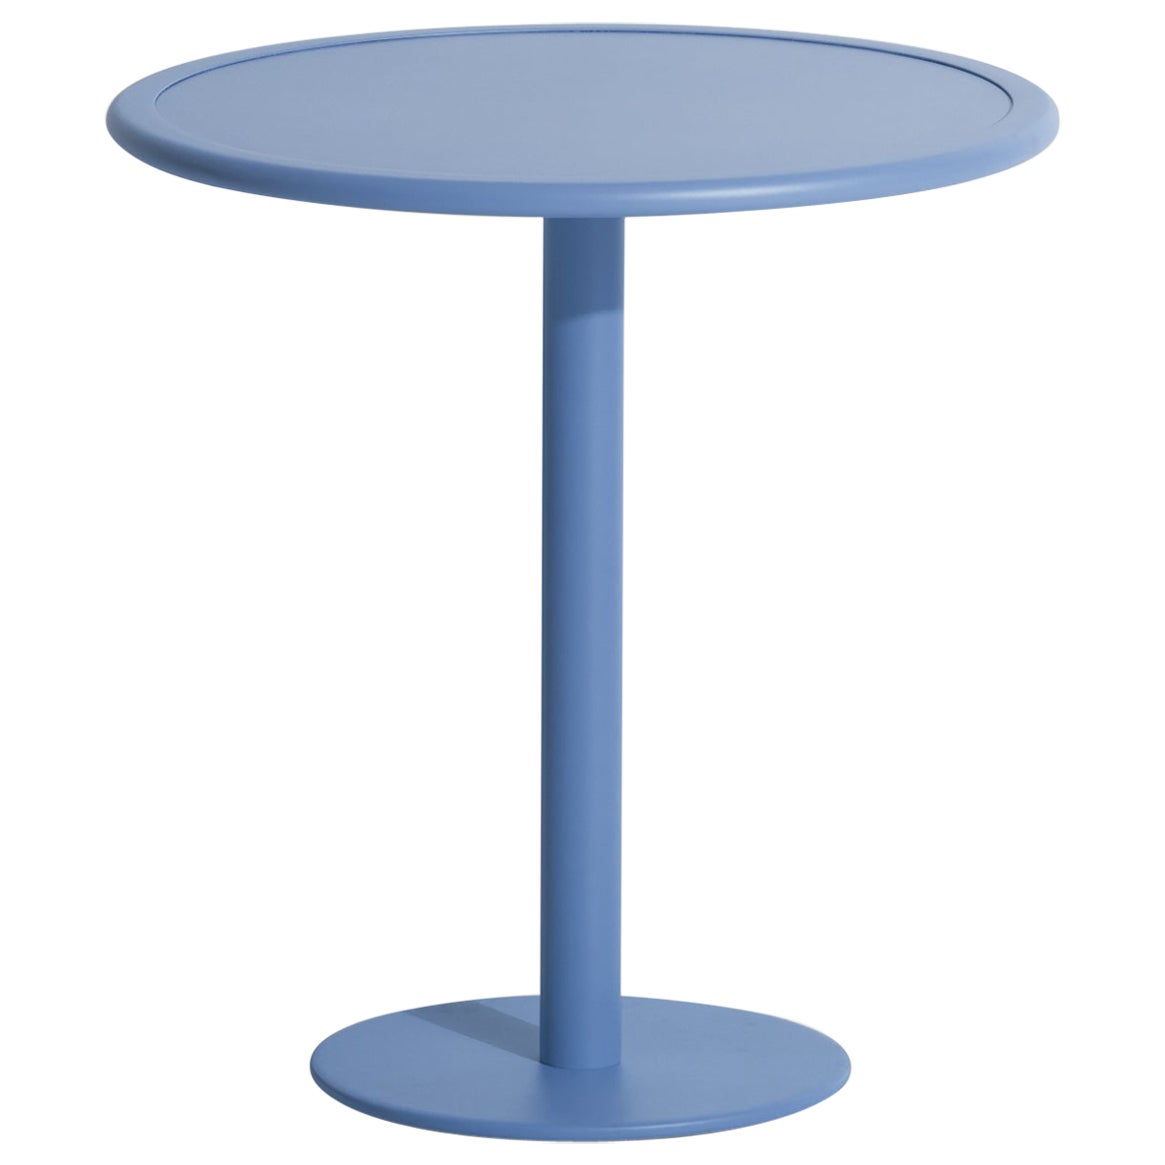 Petite Friture Week-End Bistro Round Dining Table in Azure Blue Aluminium, 2017 For Sale